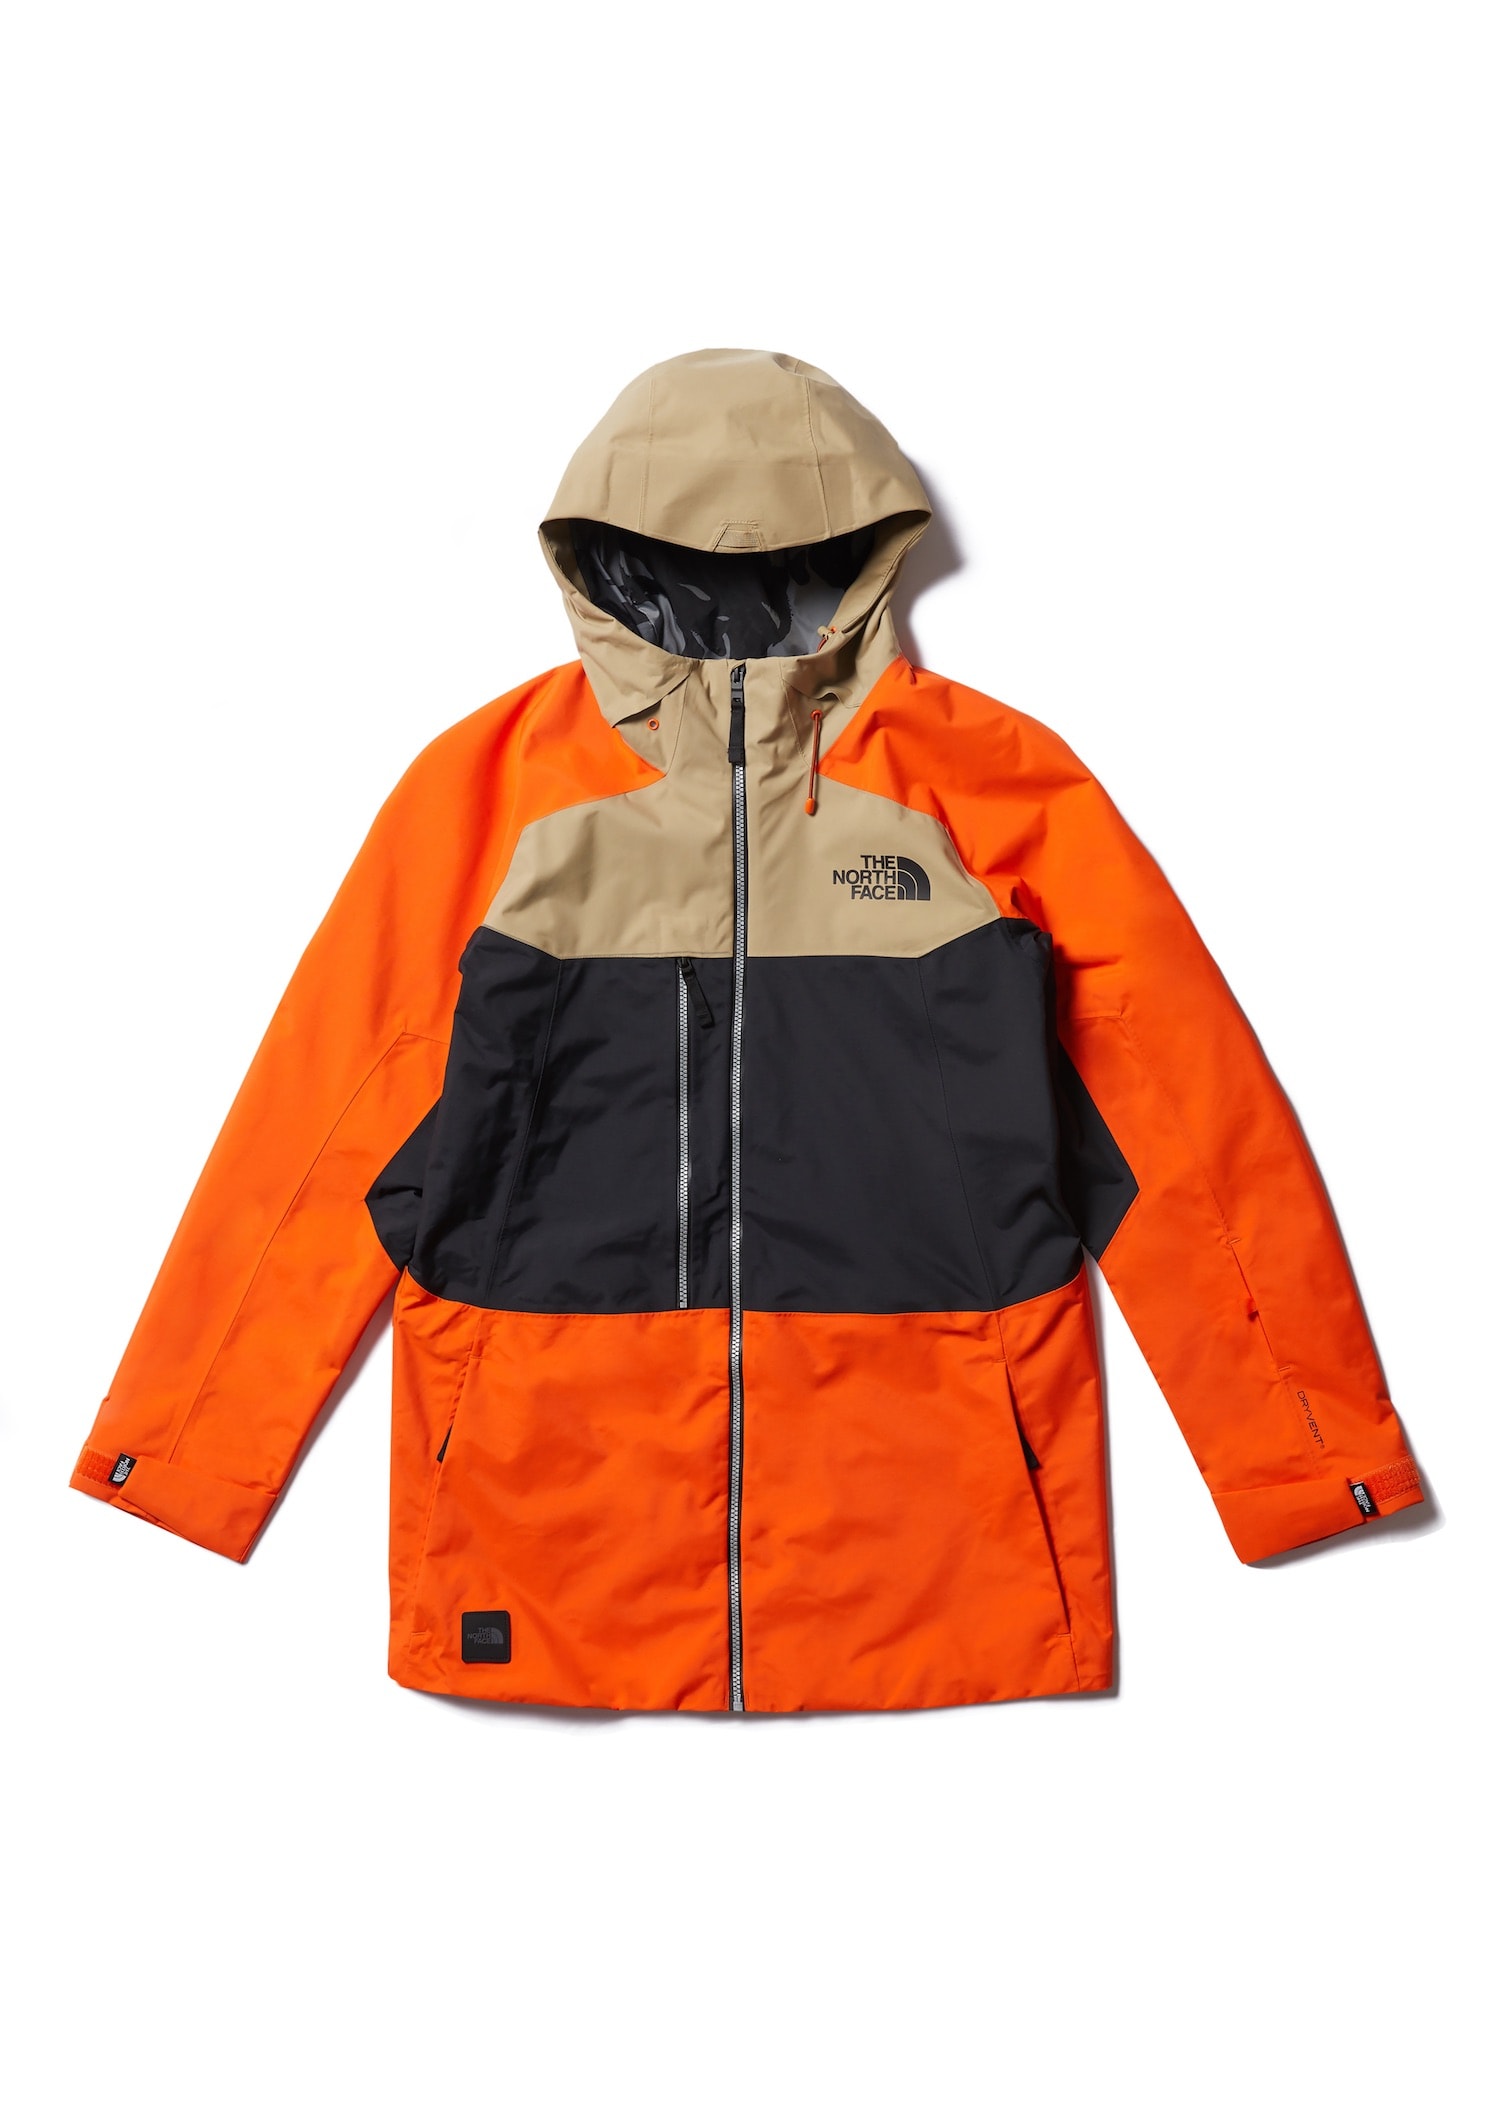 The North Face 推出全新「SNOW IS HOT」系列